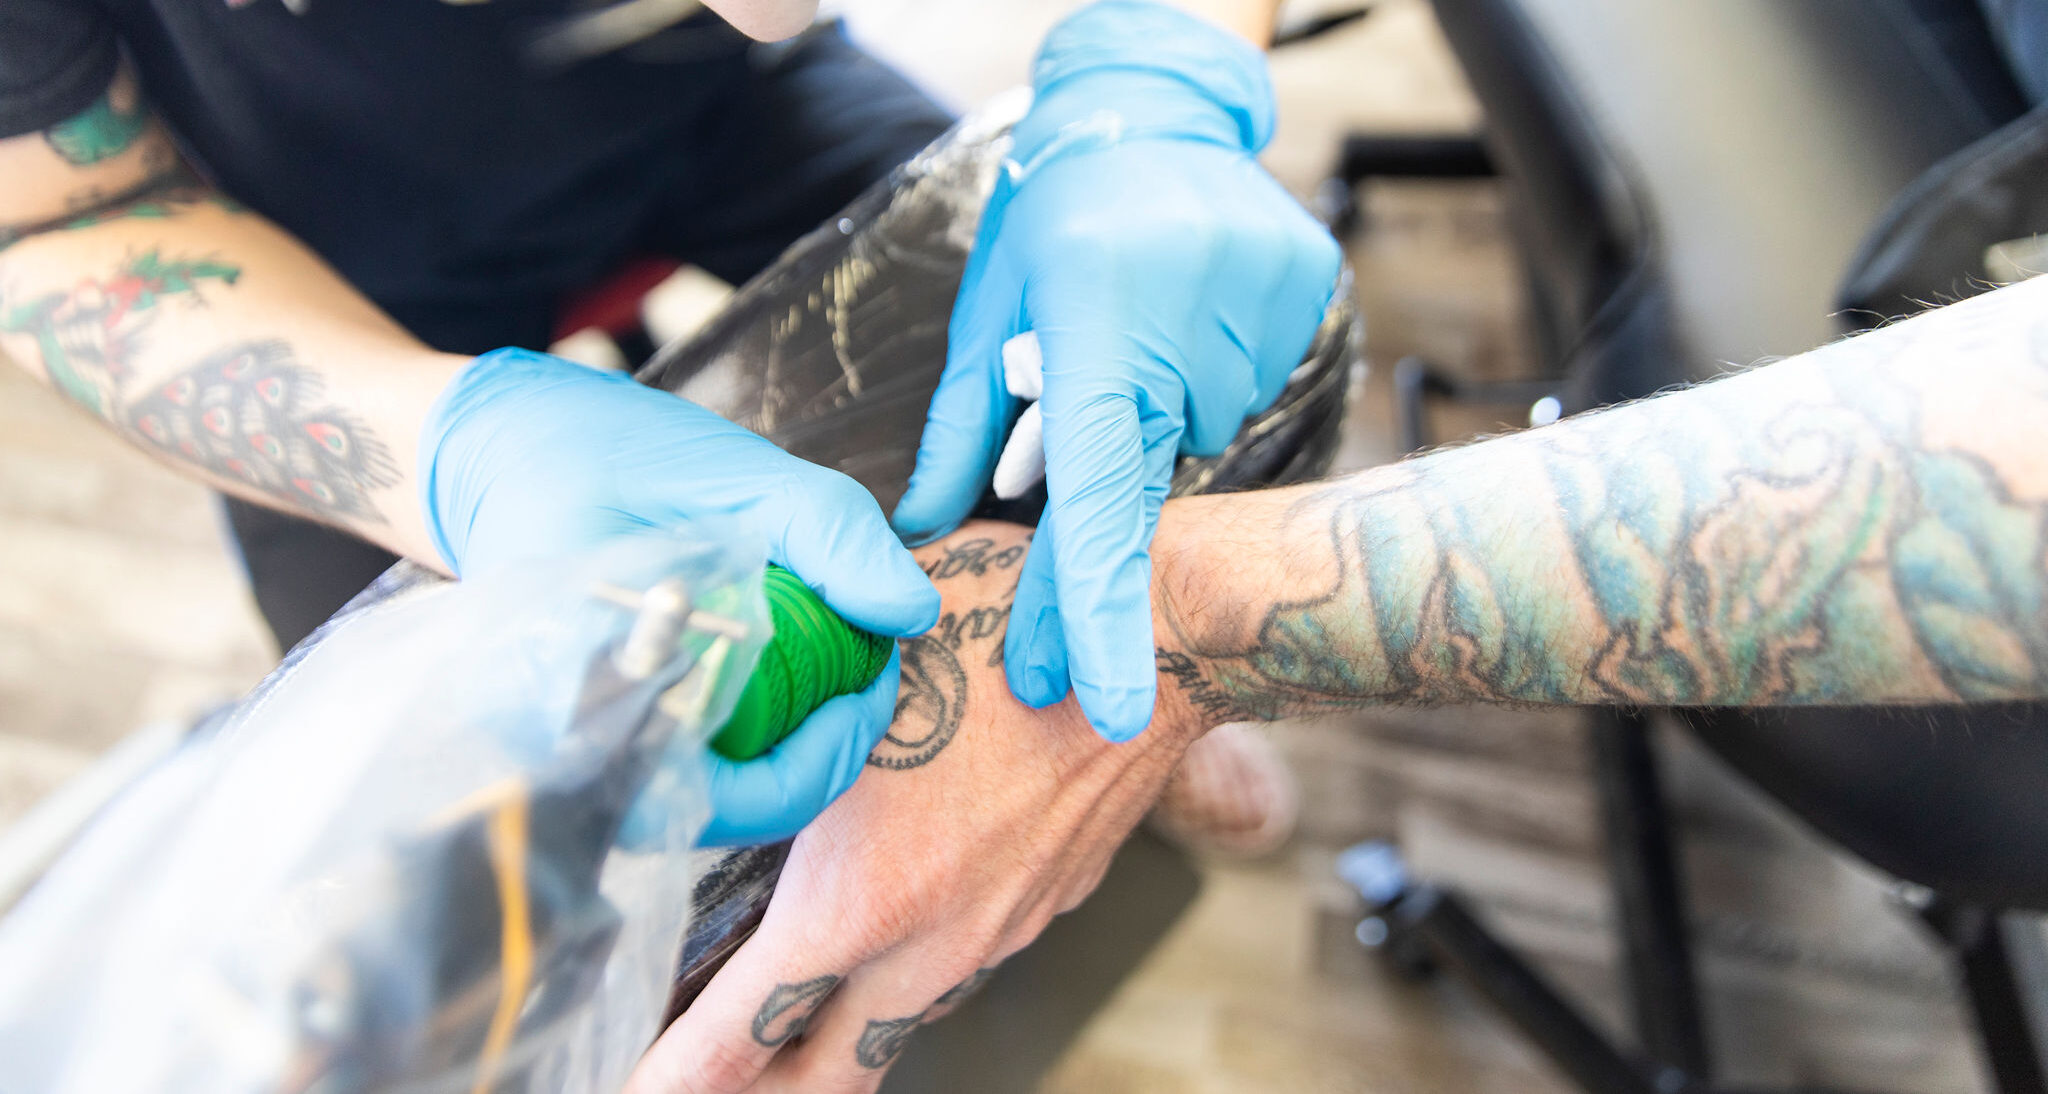 Tat's a good deal:' Local tattoo shop offers specials for Friday the 13th  trend